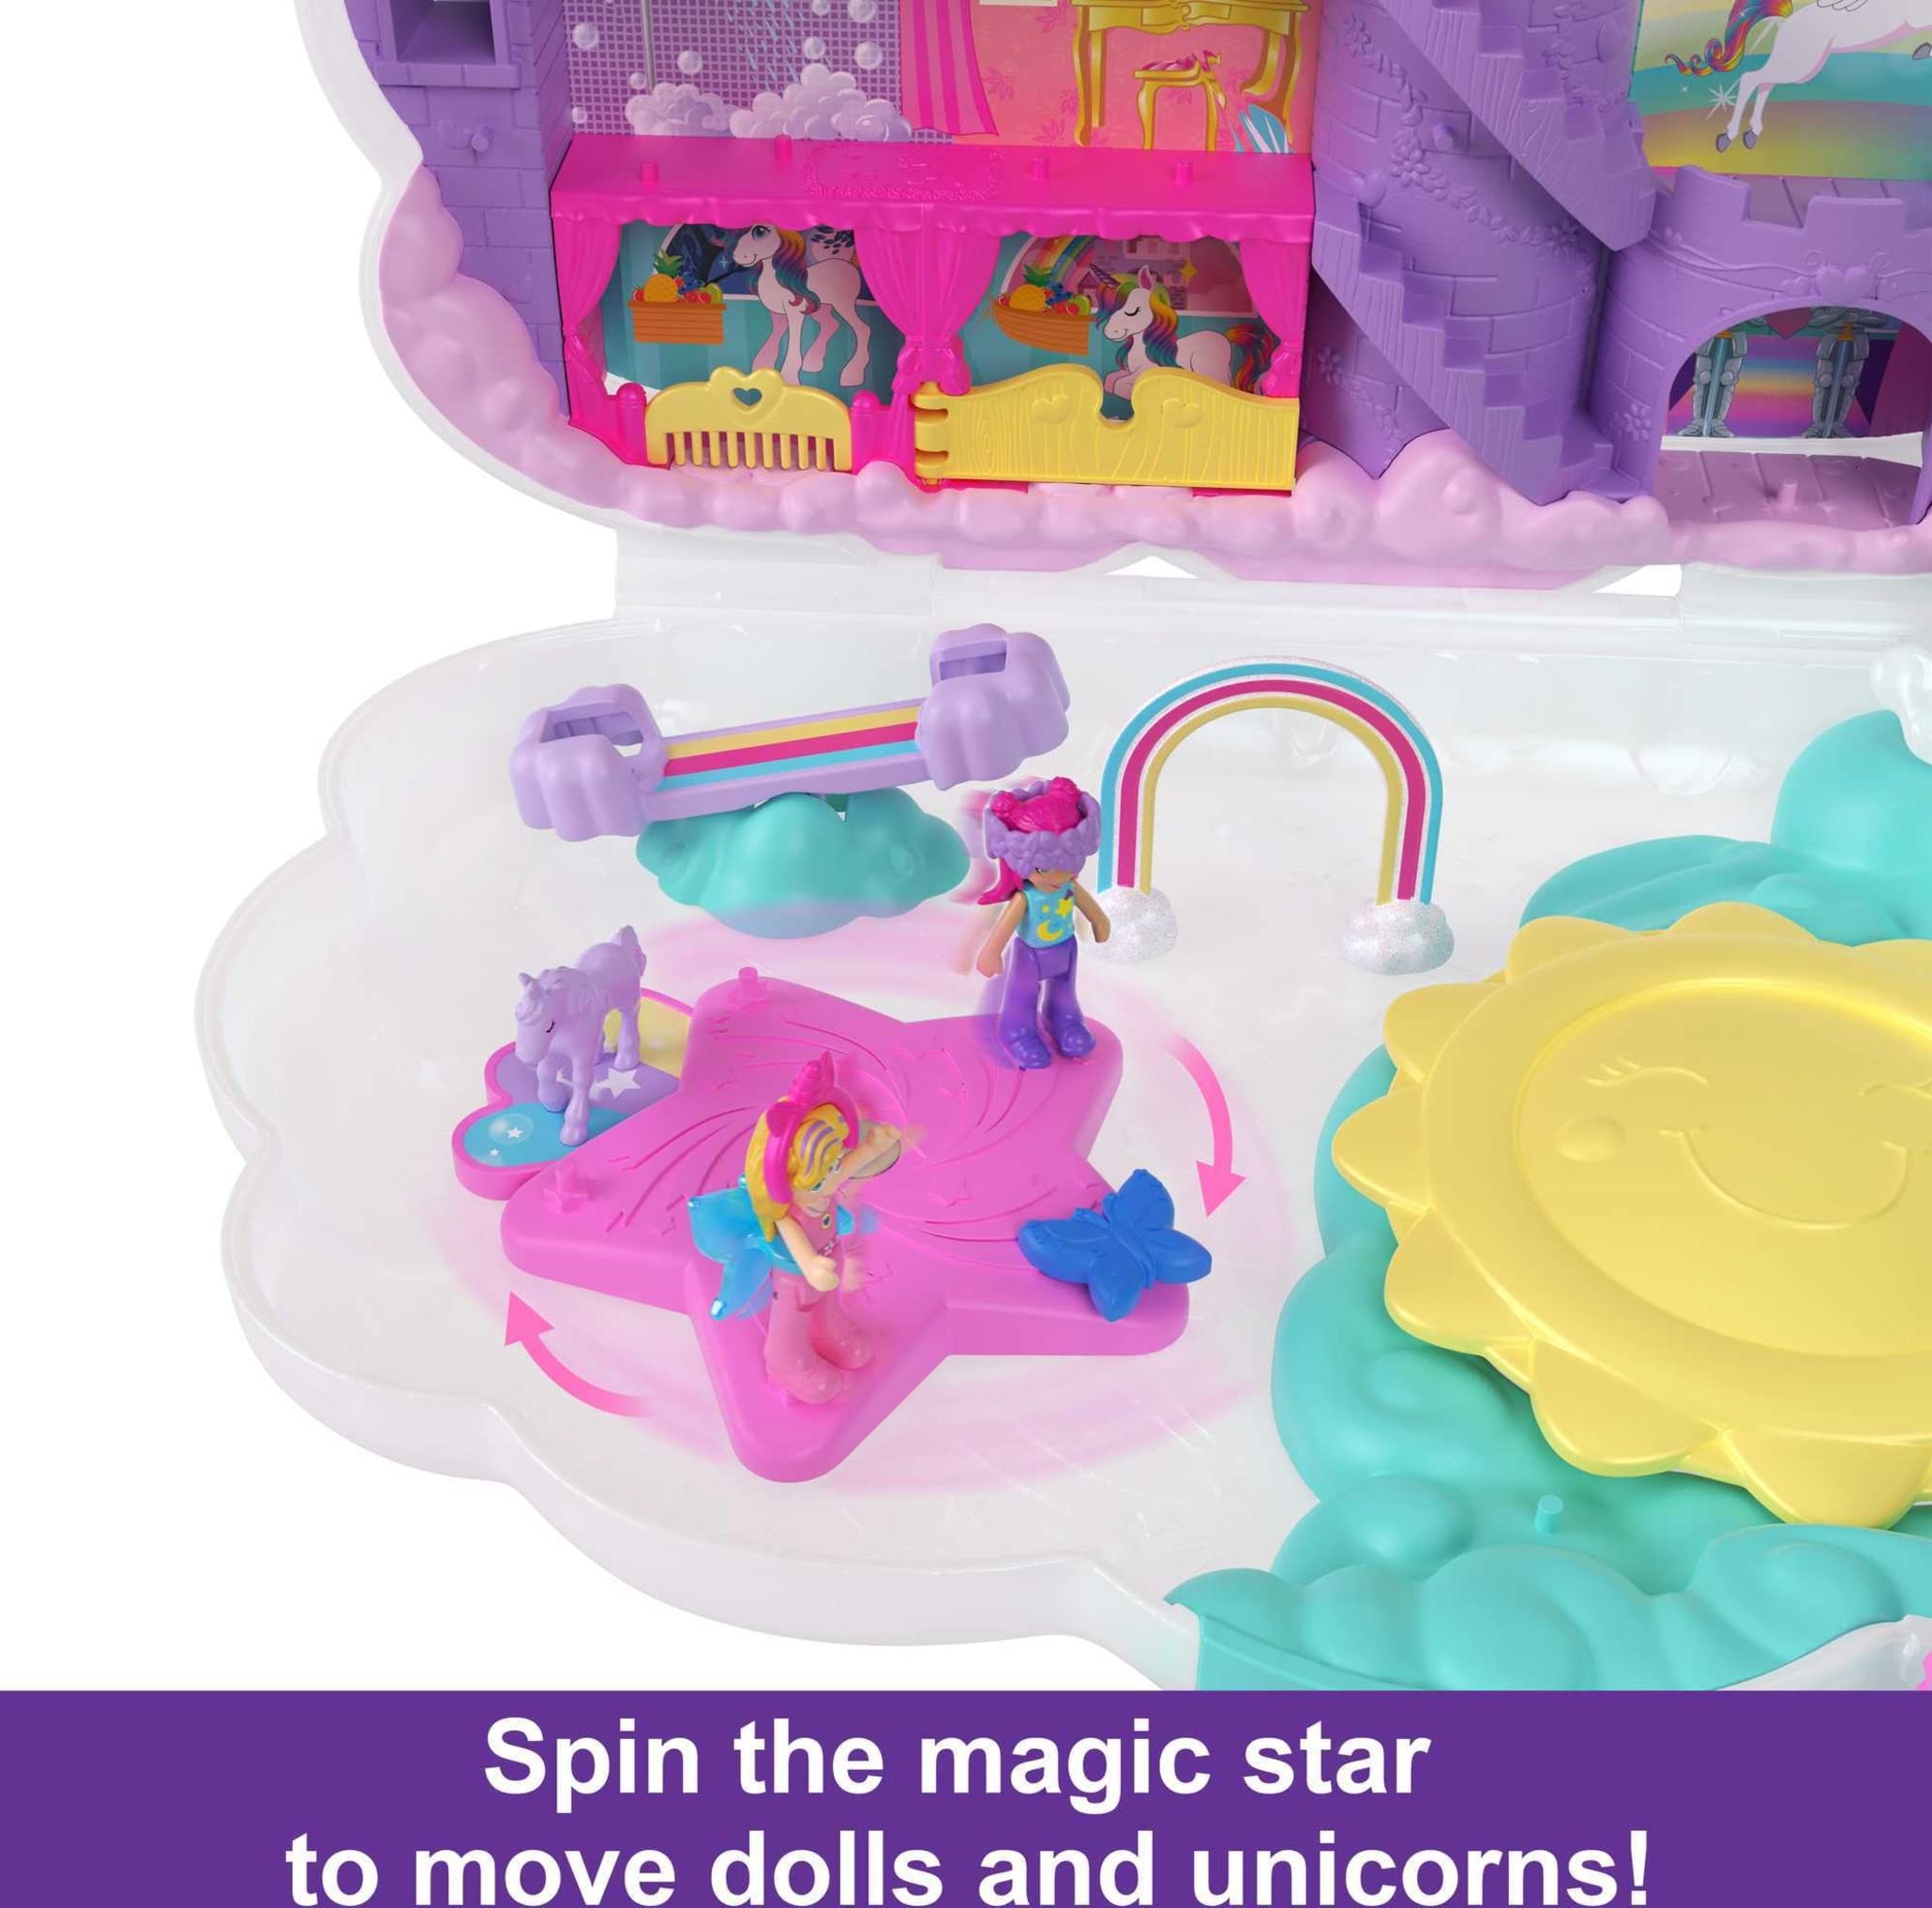 Polly Pocket 2-In-1 Travel Toy, Rainbow Unicorn Salon Styling Head with 2 Micro Dolls & 20+ Accessories